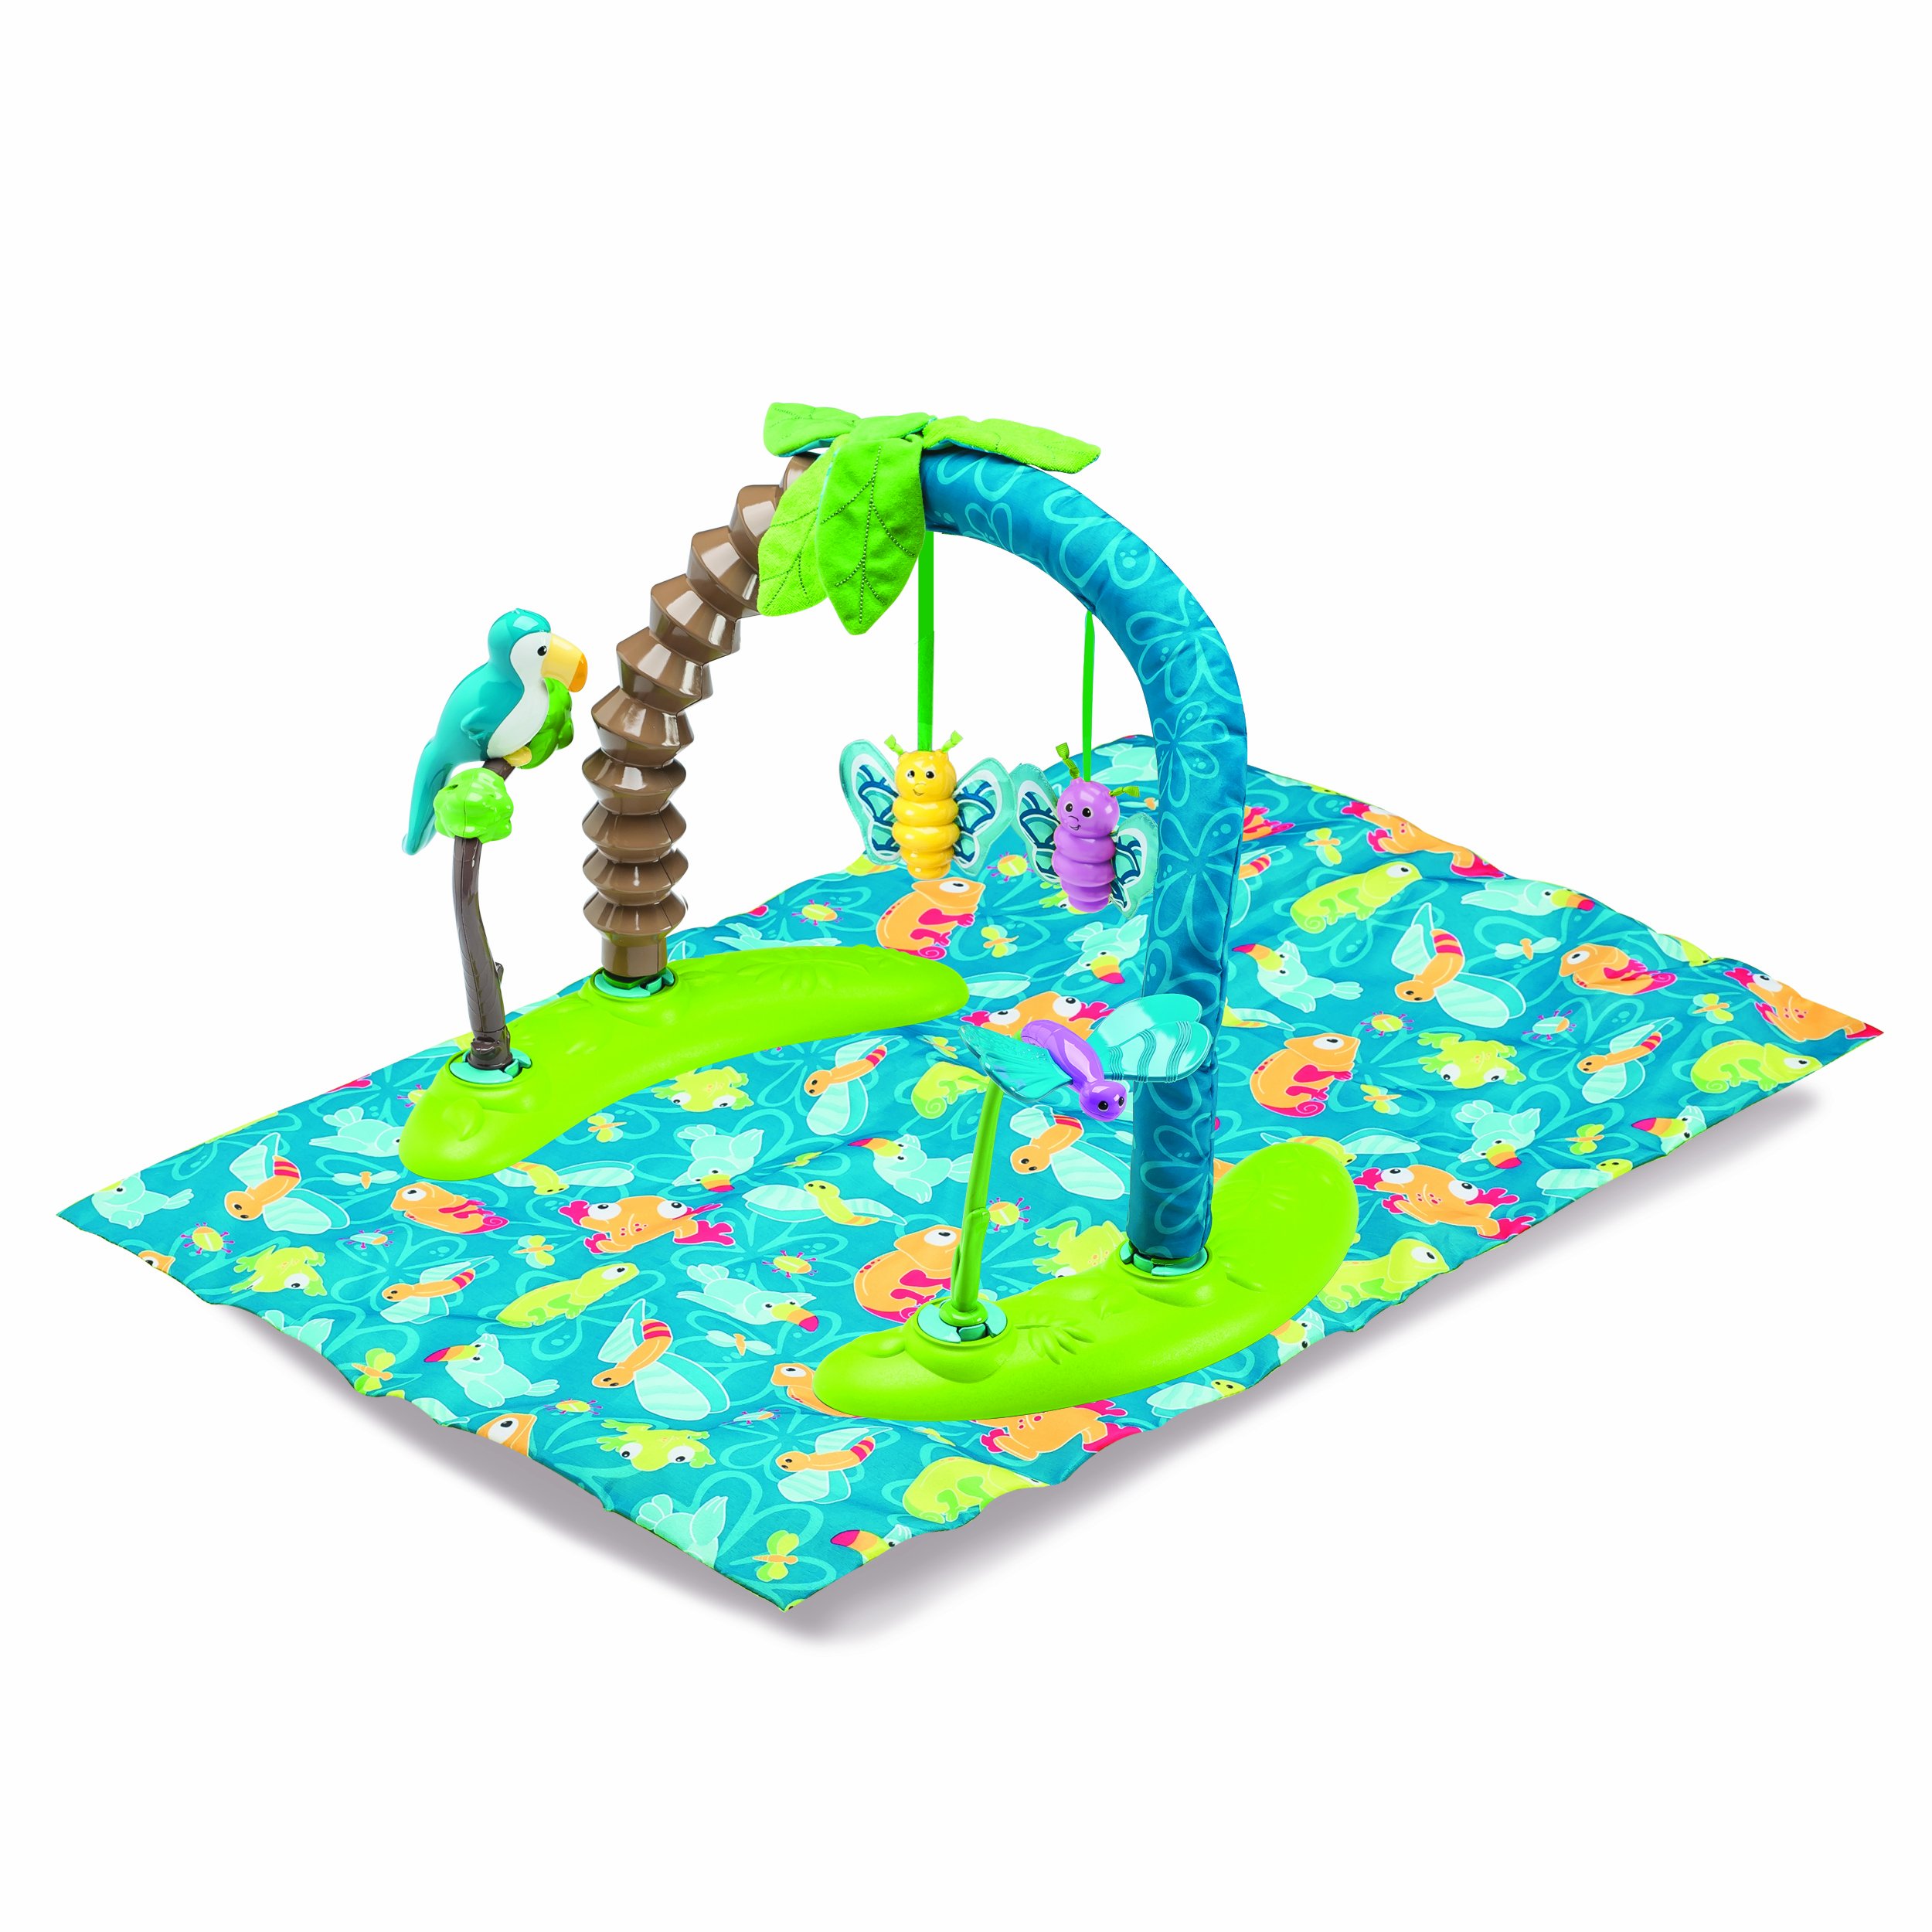 Evenflo Exersaucer Triple Fun Active Learning Center, Life in the Amazon, includes 1 Activity Saucer